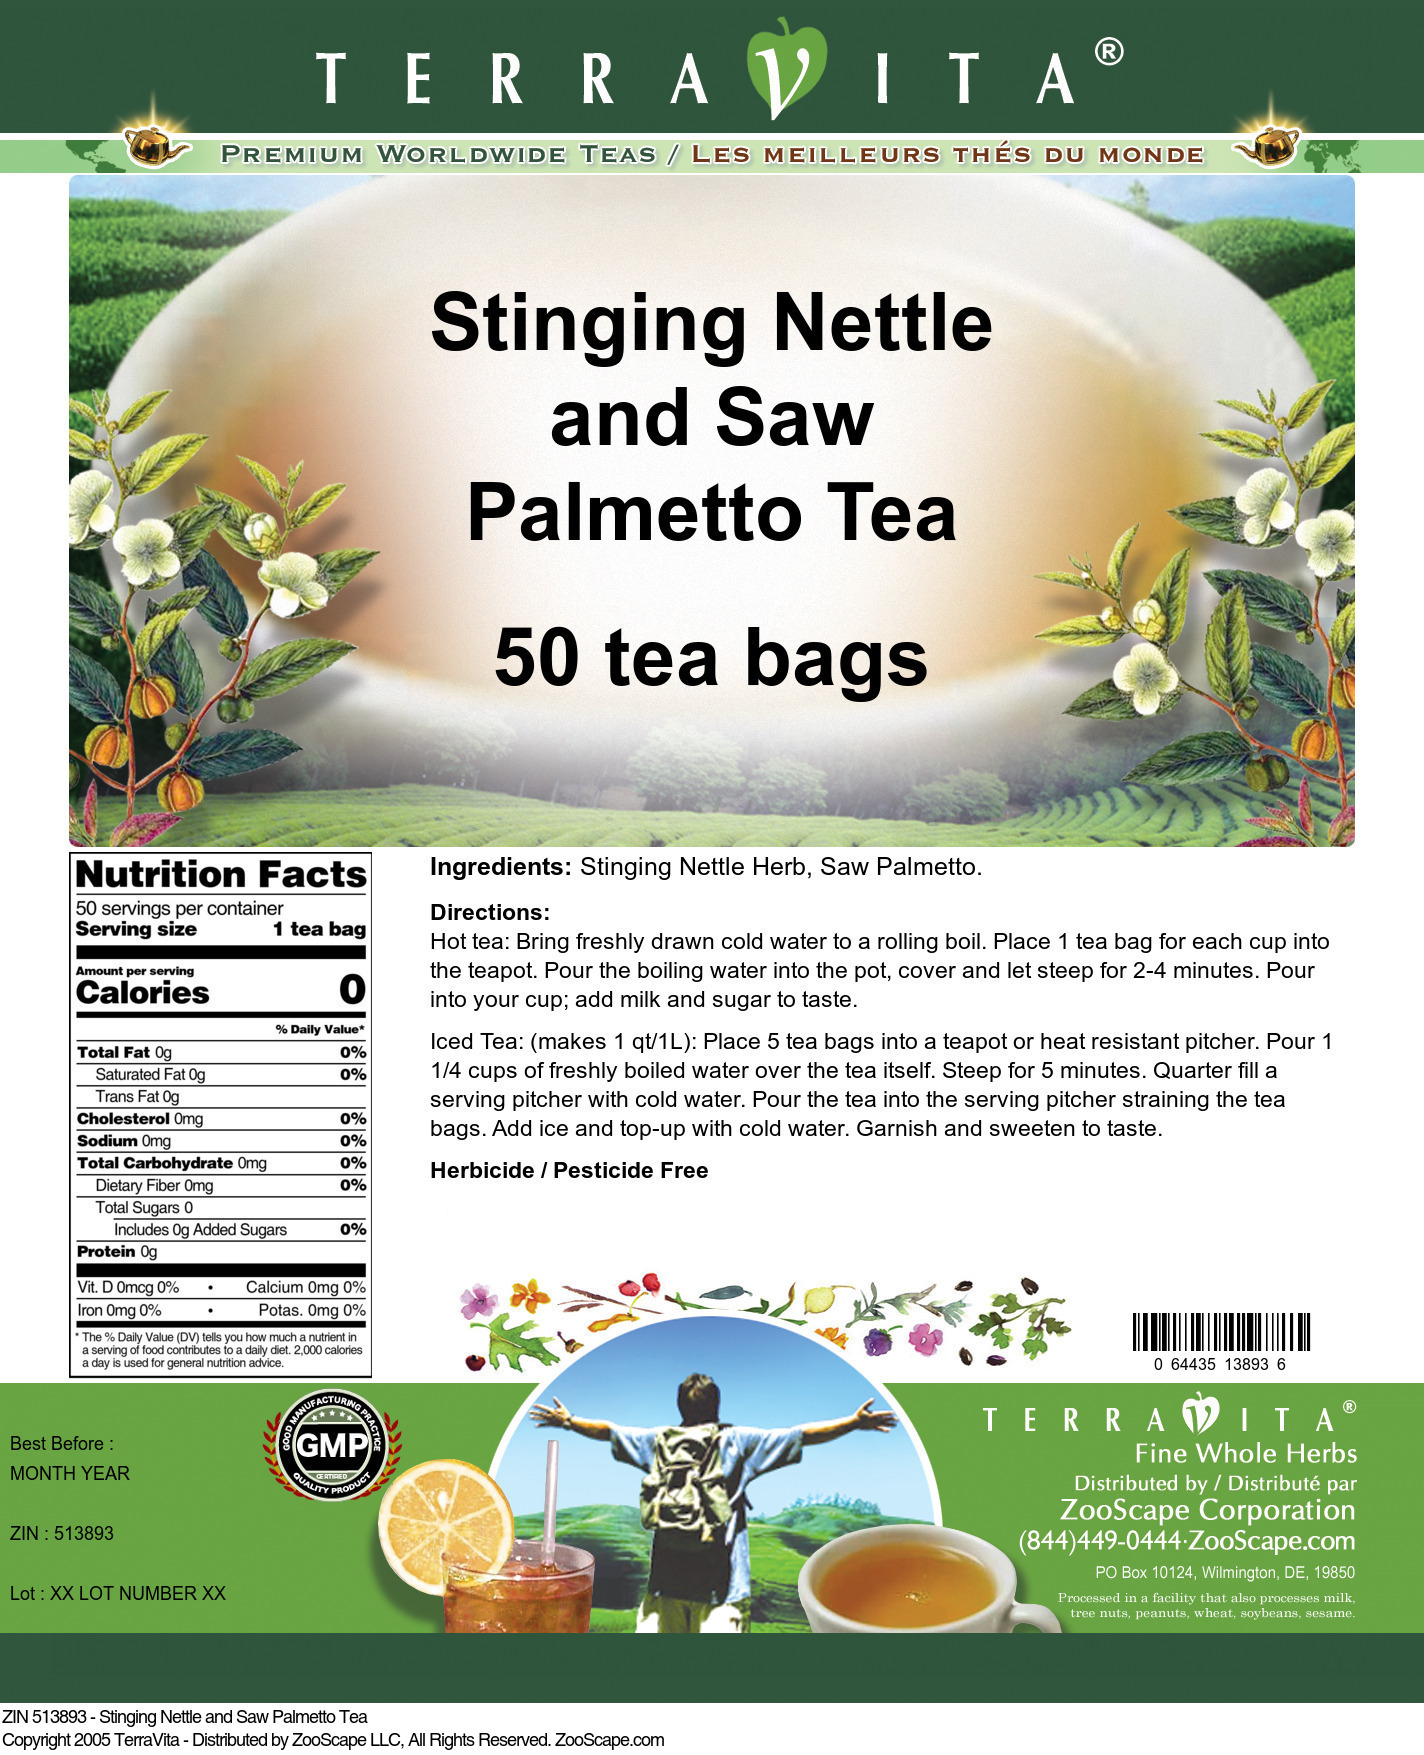 Stinging Nettle and Saw Palmetto Tea - Label